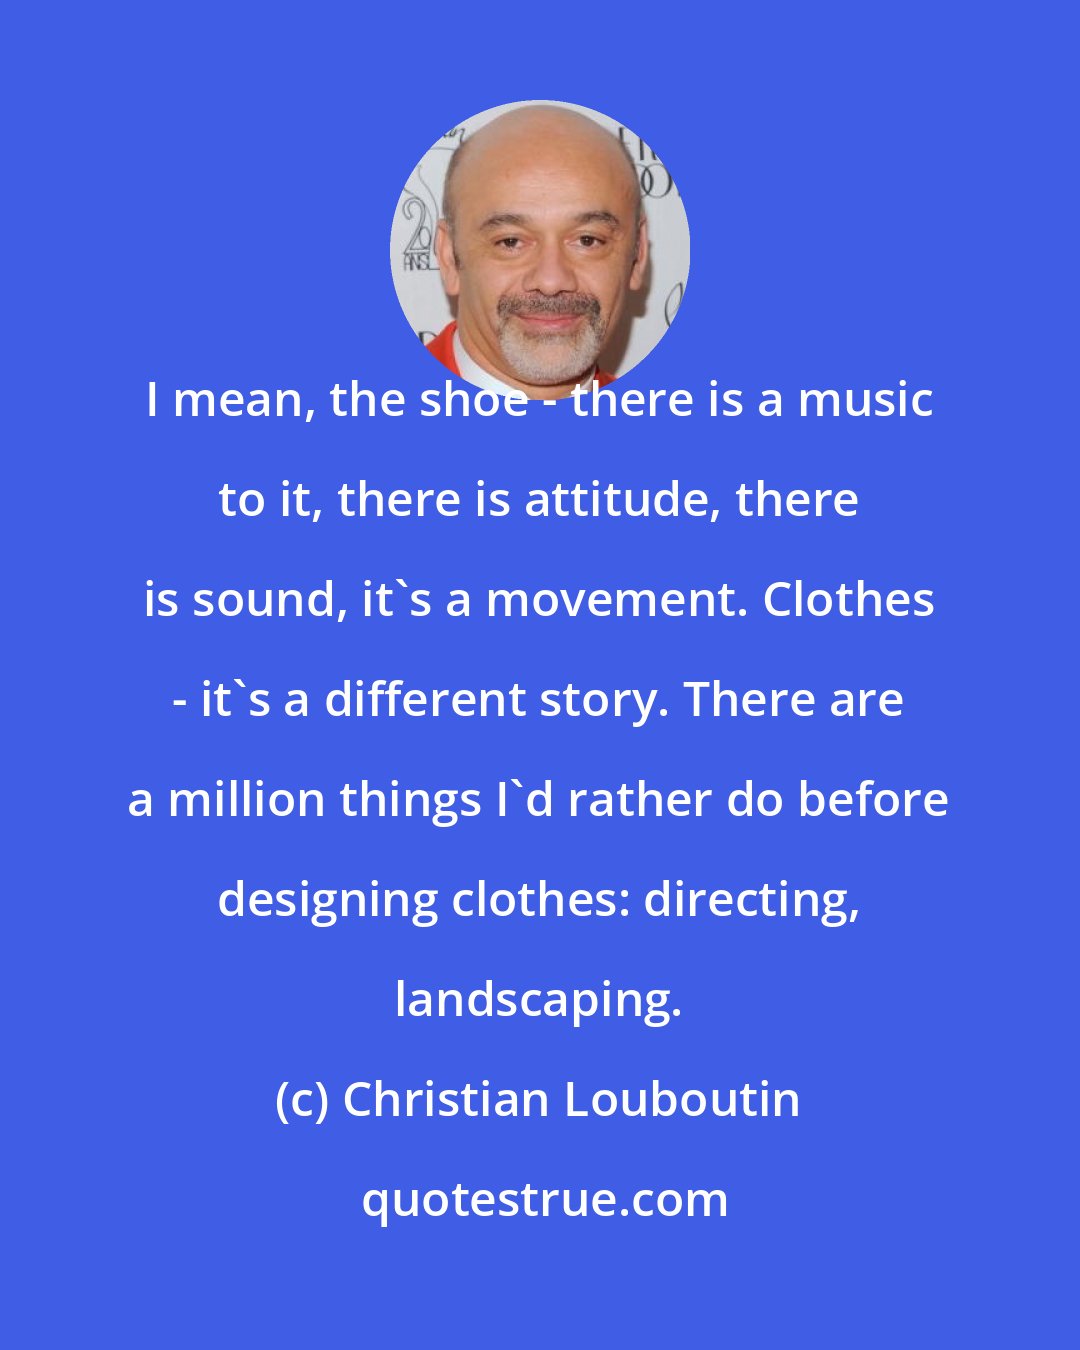 Christian Louboutin: I mean, the shoe - there is a music to it, there is attitude, there is sound, it's a movement. Clothes - it's a different story. There are a million things I'd rather do before designing clothes: directing, landscaping.